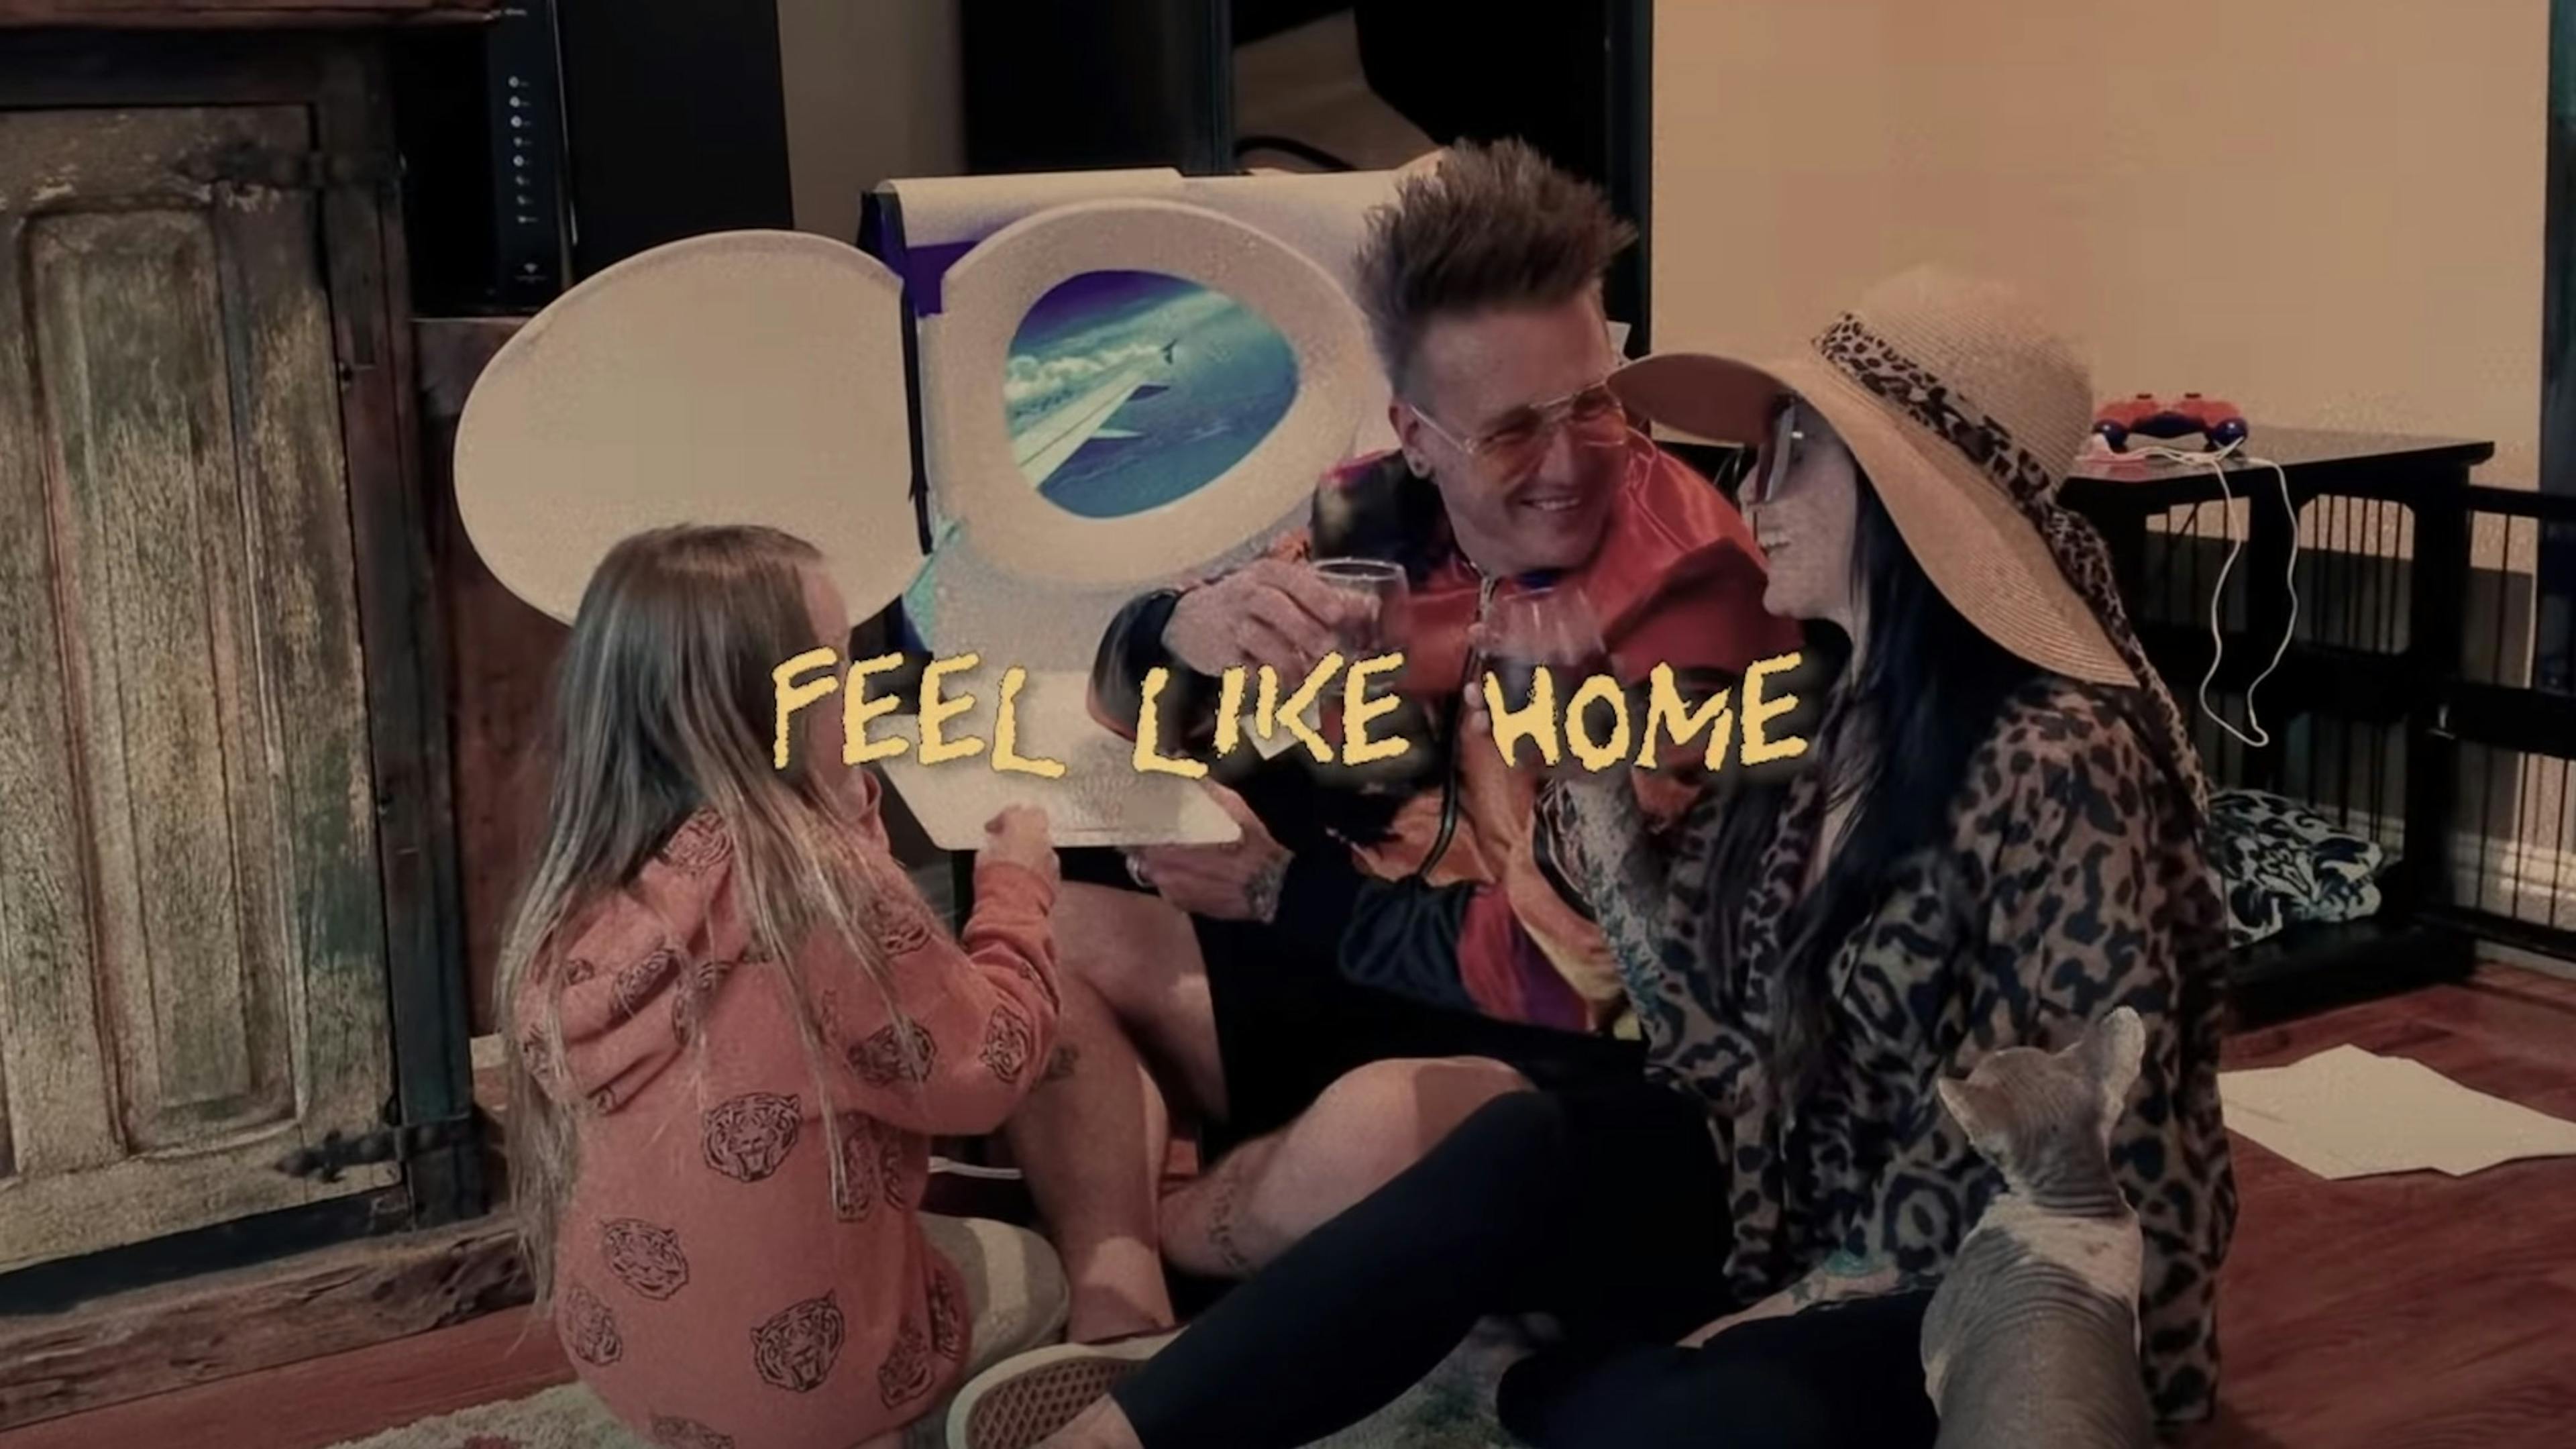 Watch Papa Roach's Wholesome Quarantine Video For Feel Like Home